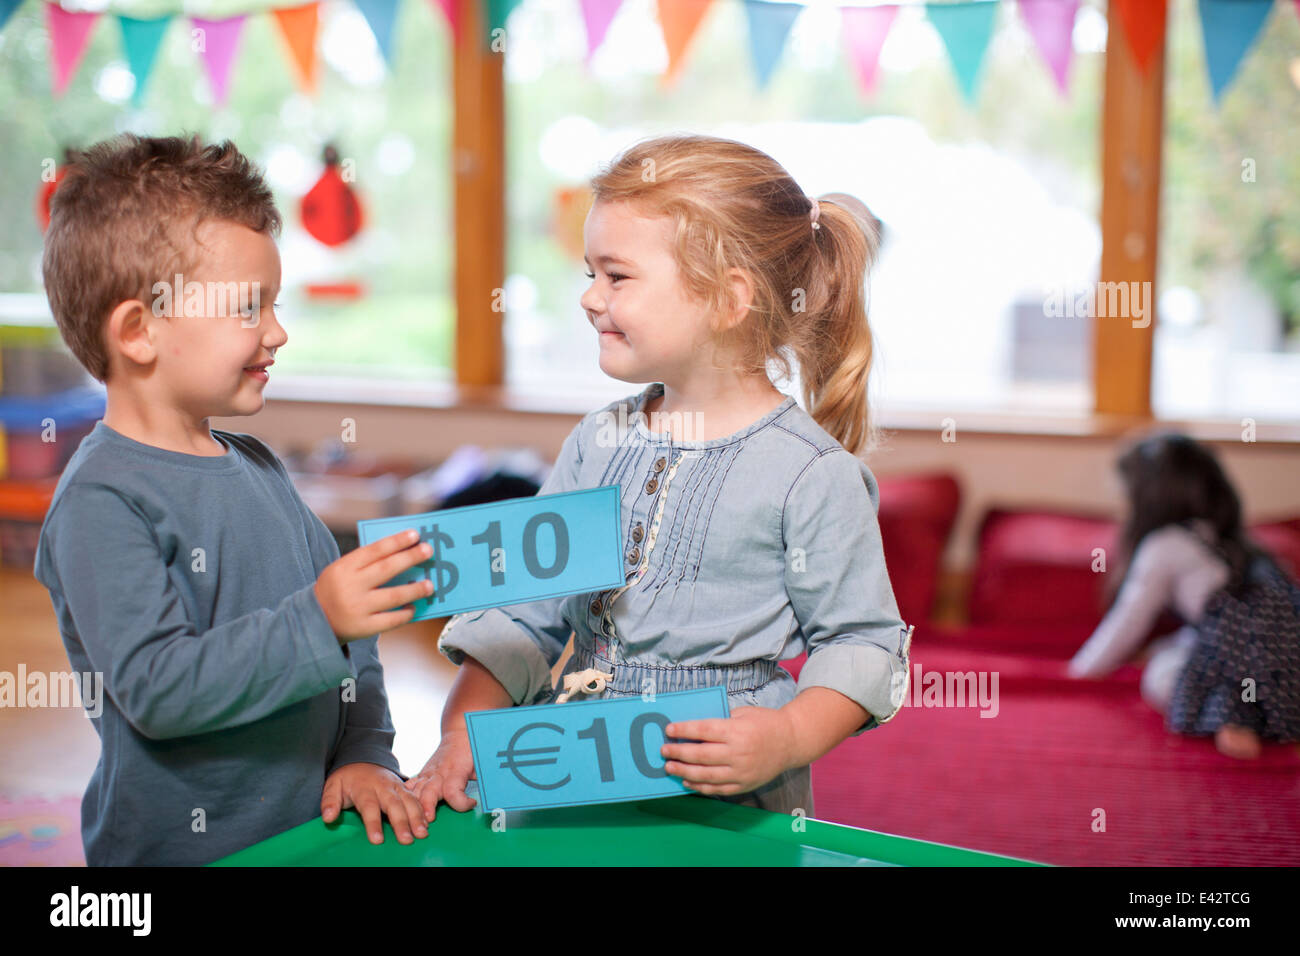 Boy and girl counting euro currency at nursery school Stock Photo